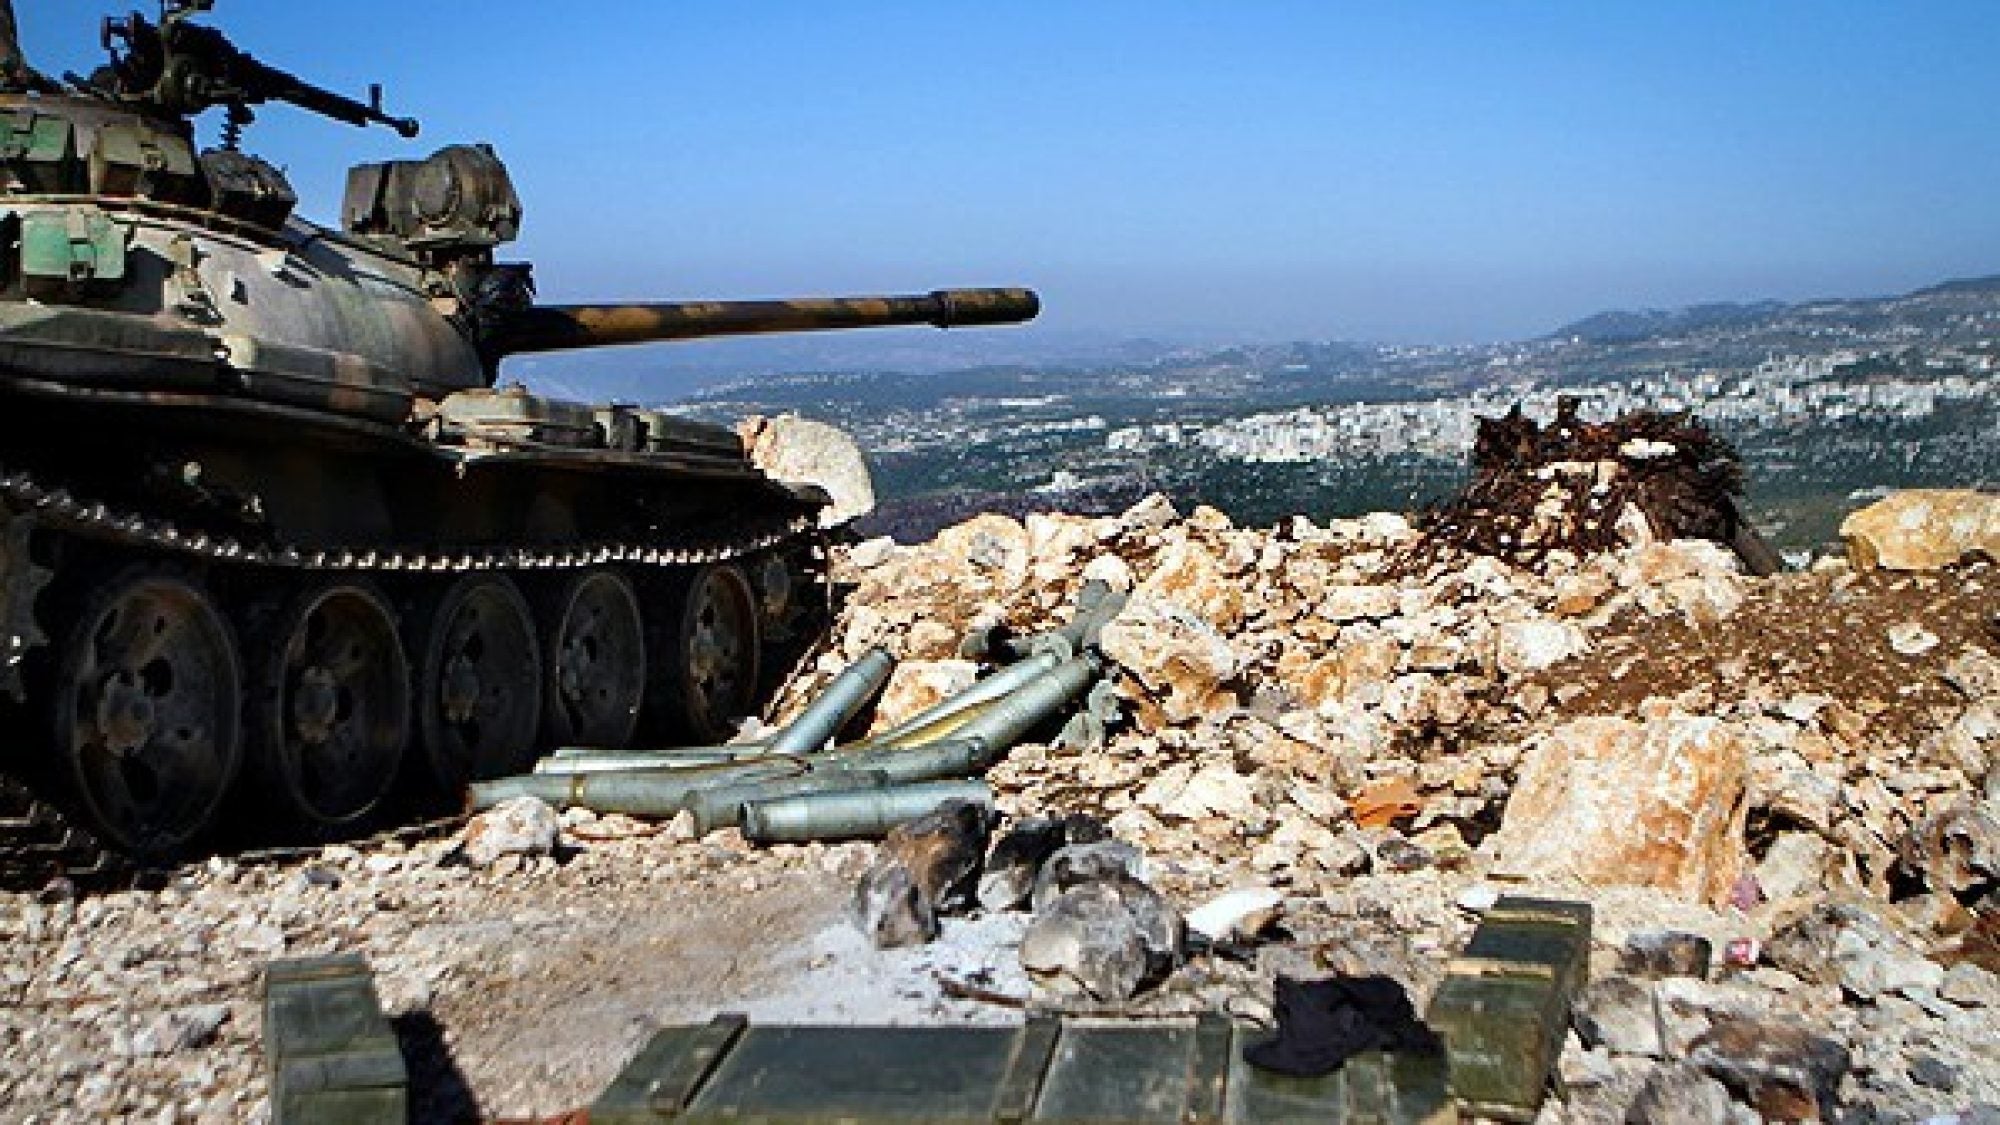 Tank stationed at the Syrian border with Turkey.